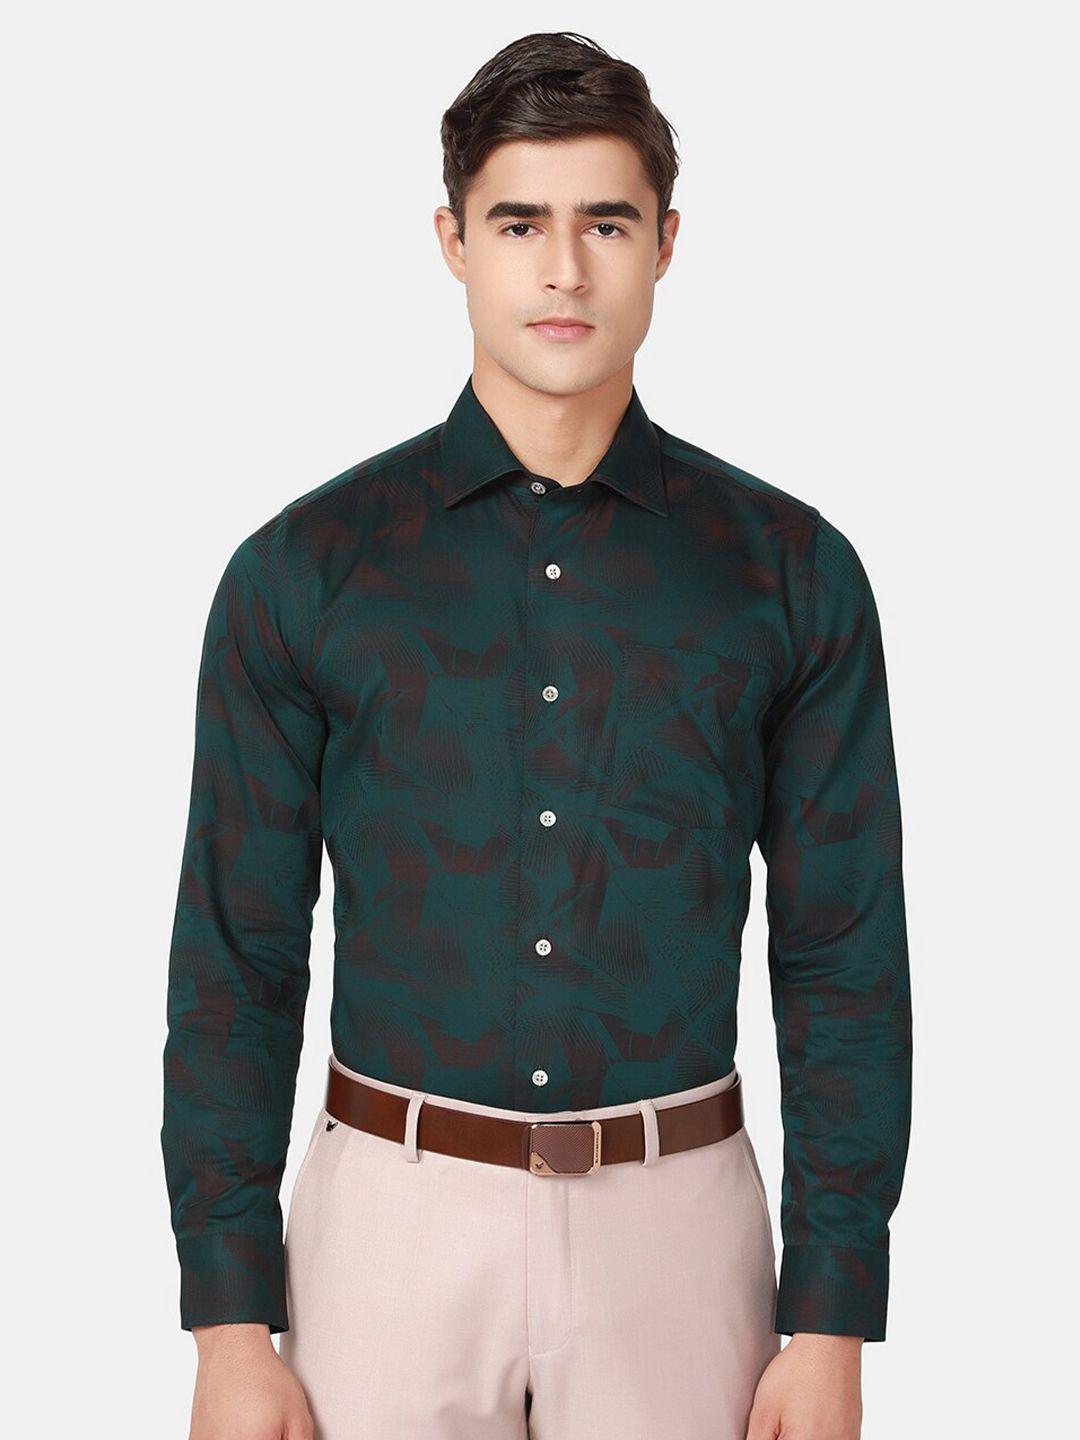 blackberrys india slim abstract printed spread collar pure cotton slim fit formal shirt